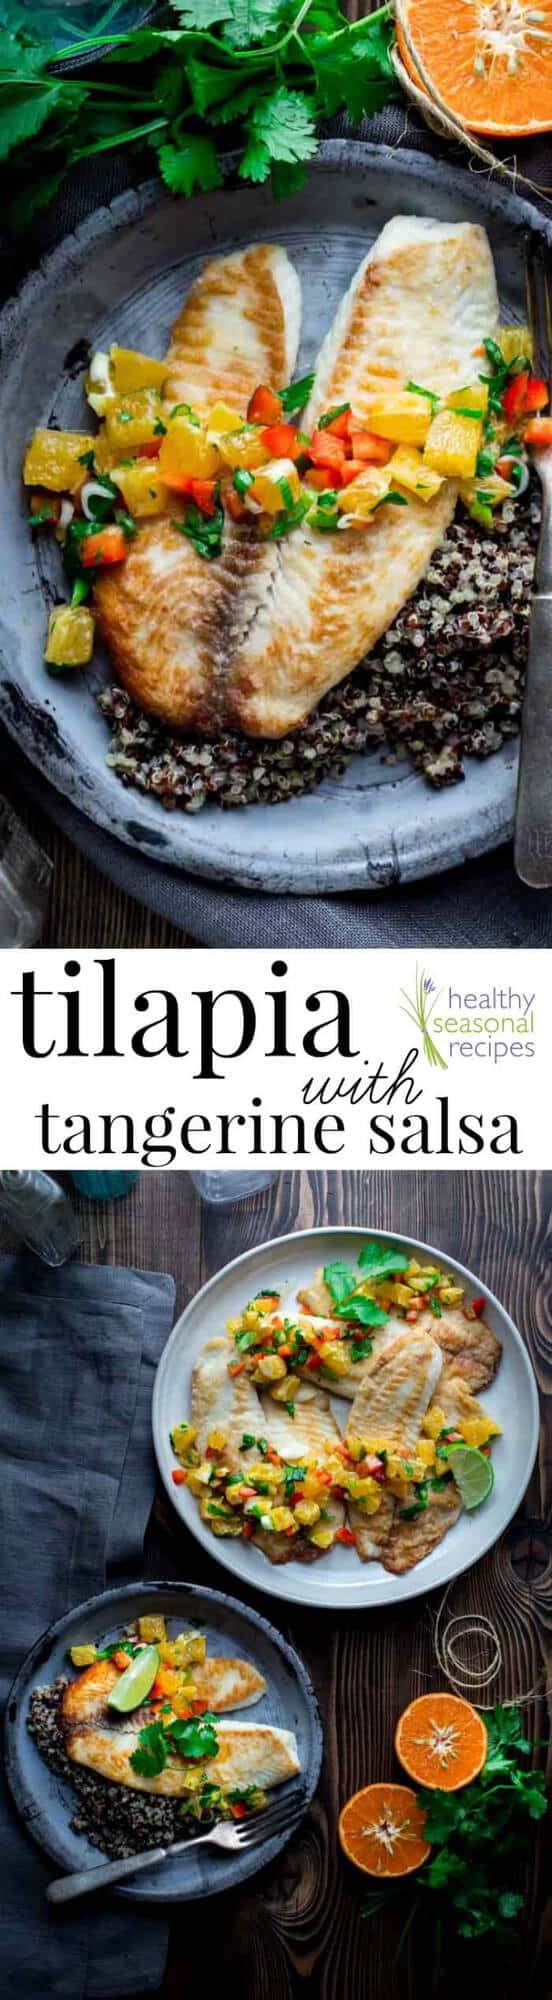  Salsa and Tilapia photo collage with text overlay